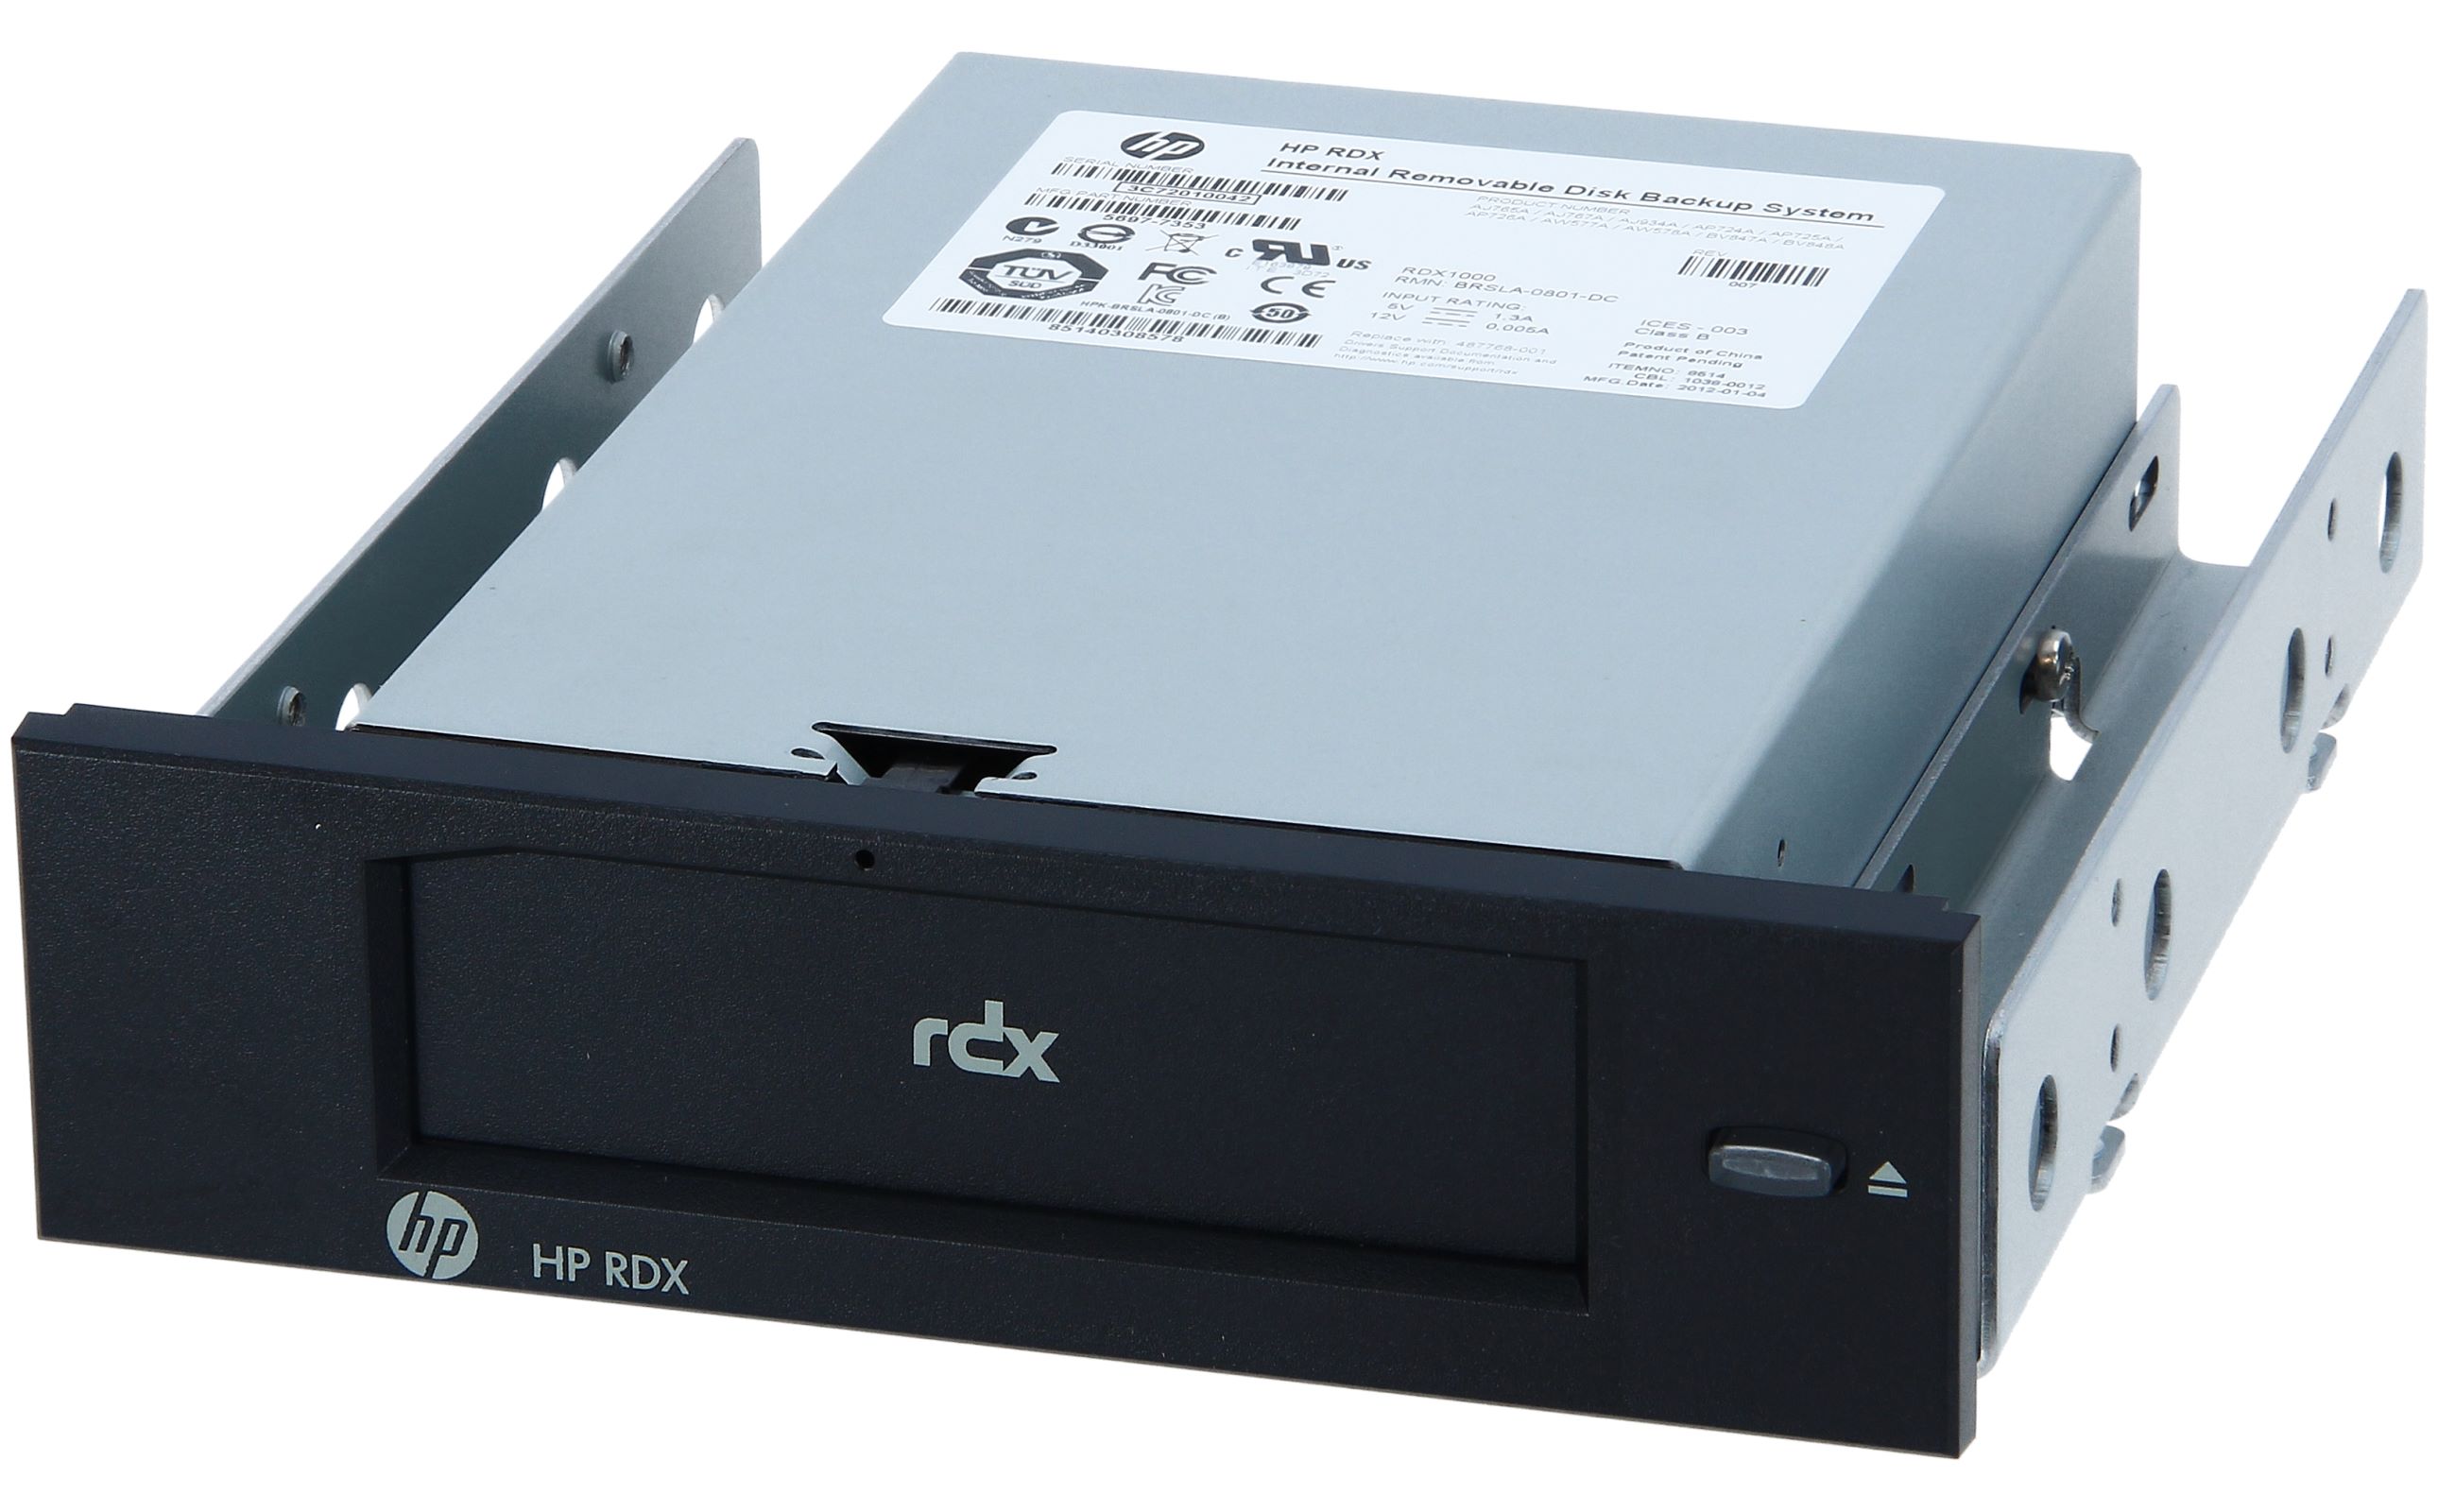 Hp Enterprise Aw578a Hp Enterprise Rdx Removable Disk Backup System Dl Server Module Laufwerk Rdx Usb 2 0 Intern 5 25 13 3 Cm New And Refurbished Buy Online Low Prices